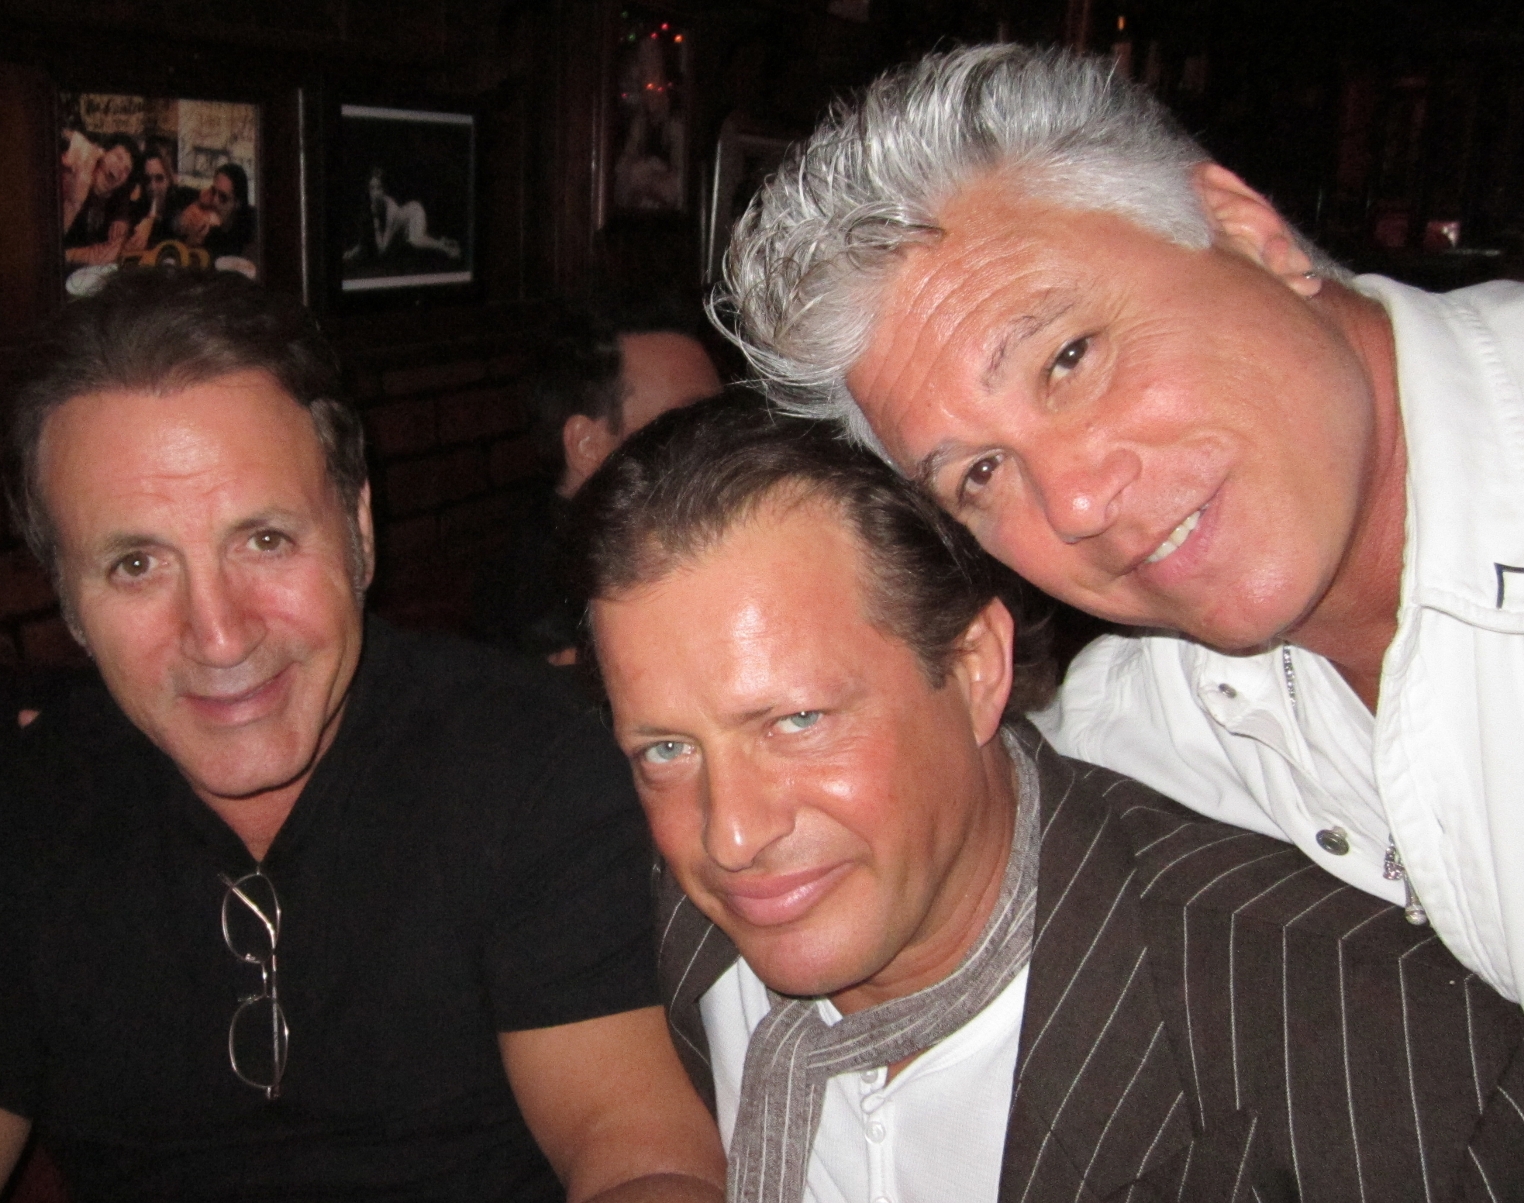 Hangin with good friends. Frank Stallone, Costas Mandylor & Private